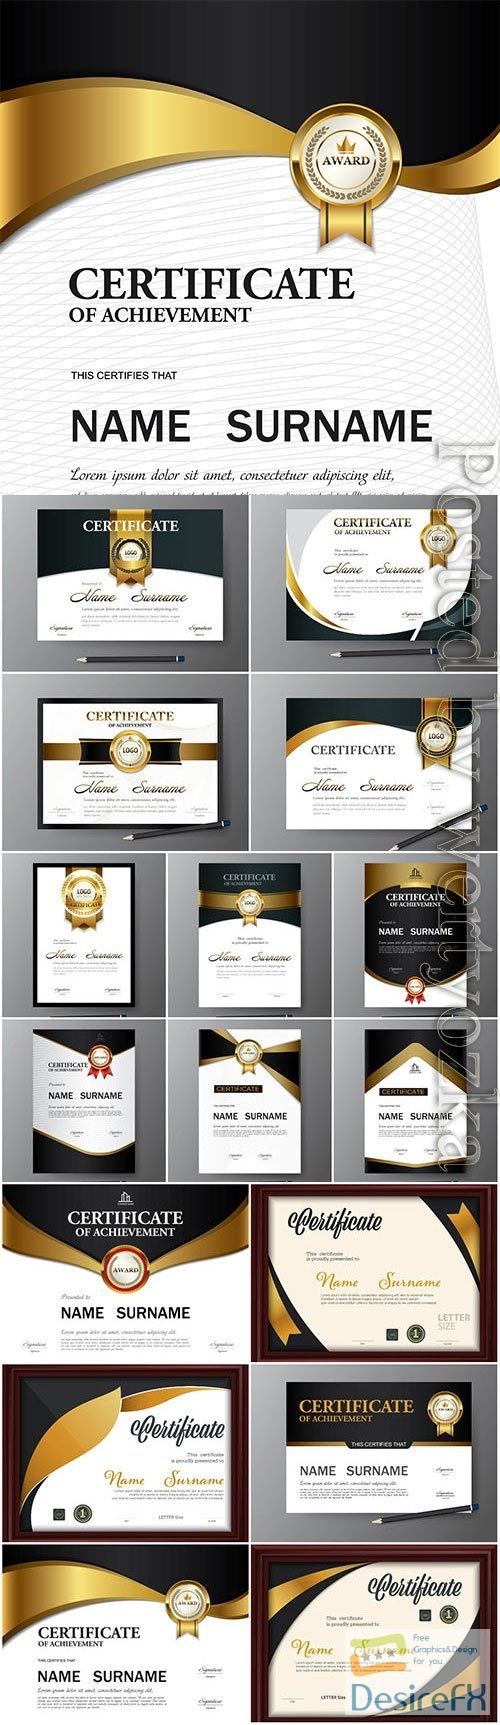 Diplomas and certificates with gold design in vector